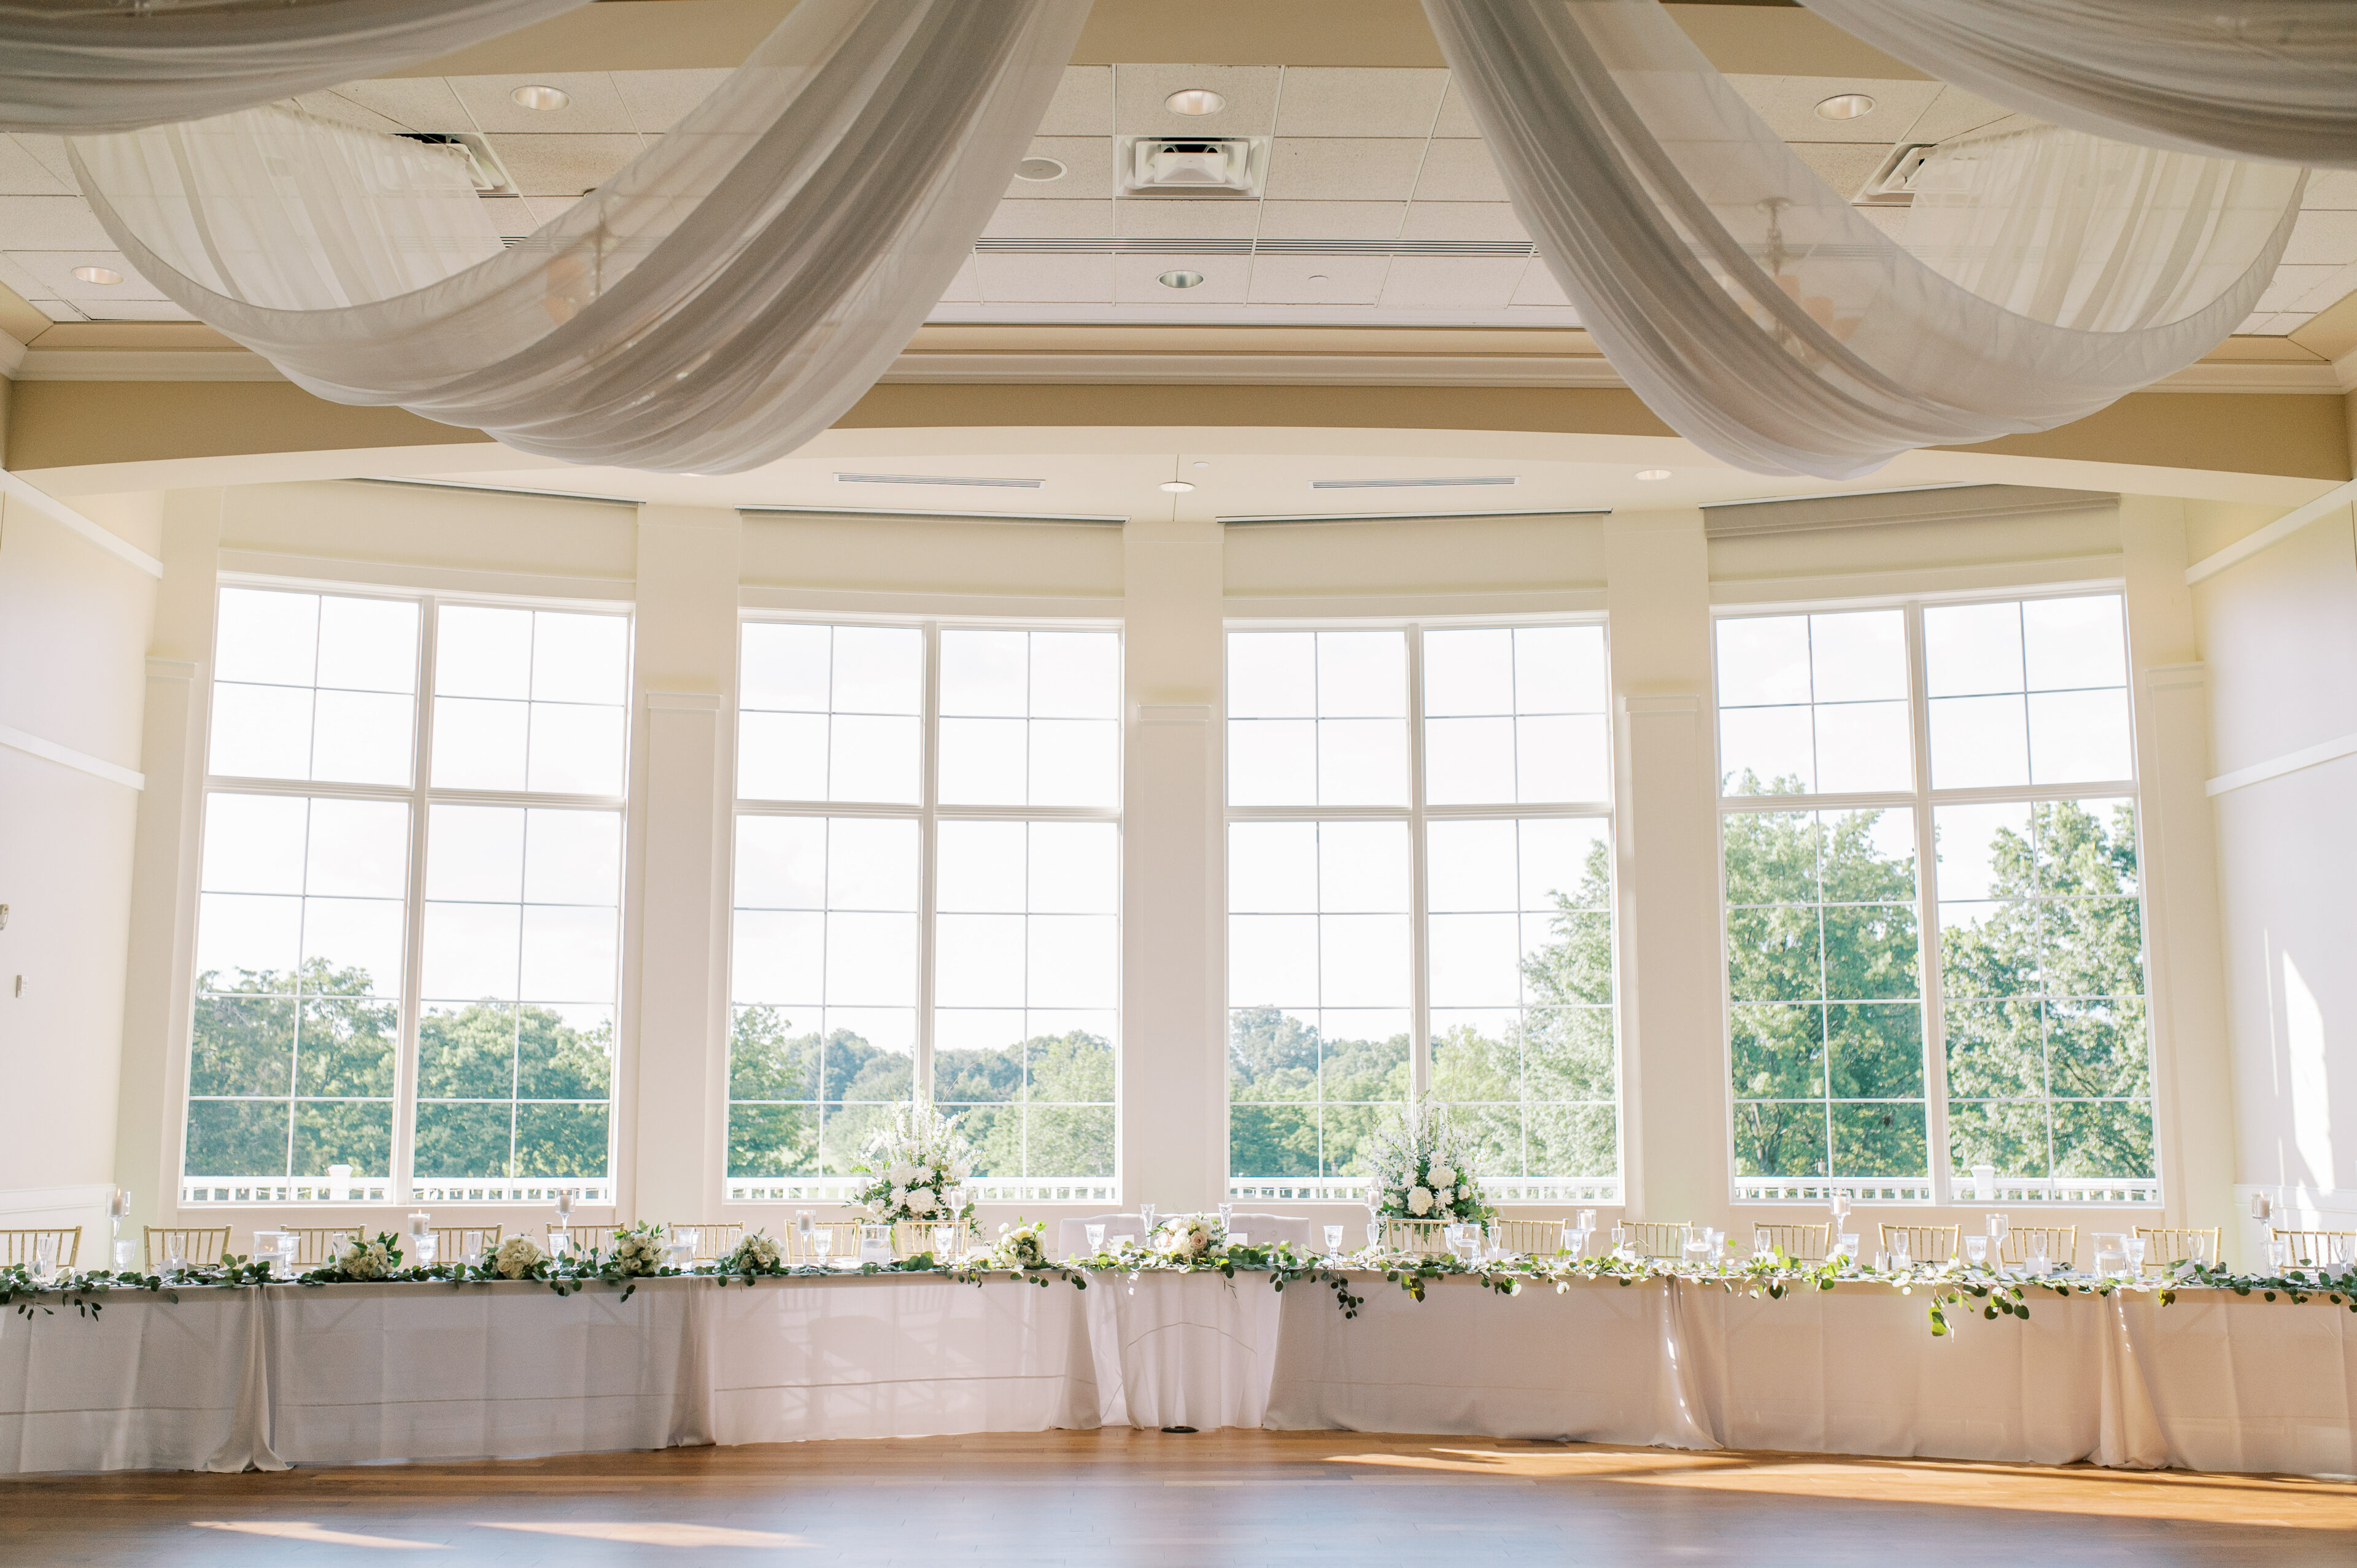 Open room with floor to ceiling windows, long white table with gold chairs and flowers, and big white draping curtains hanging from the ceiling